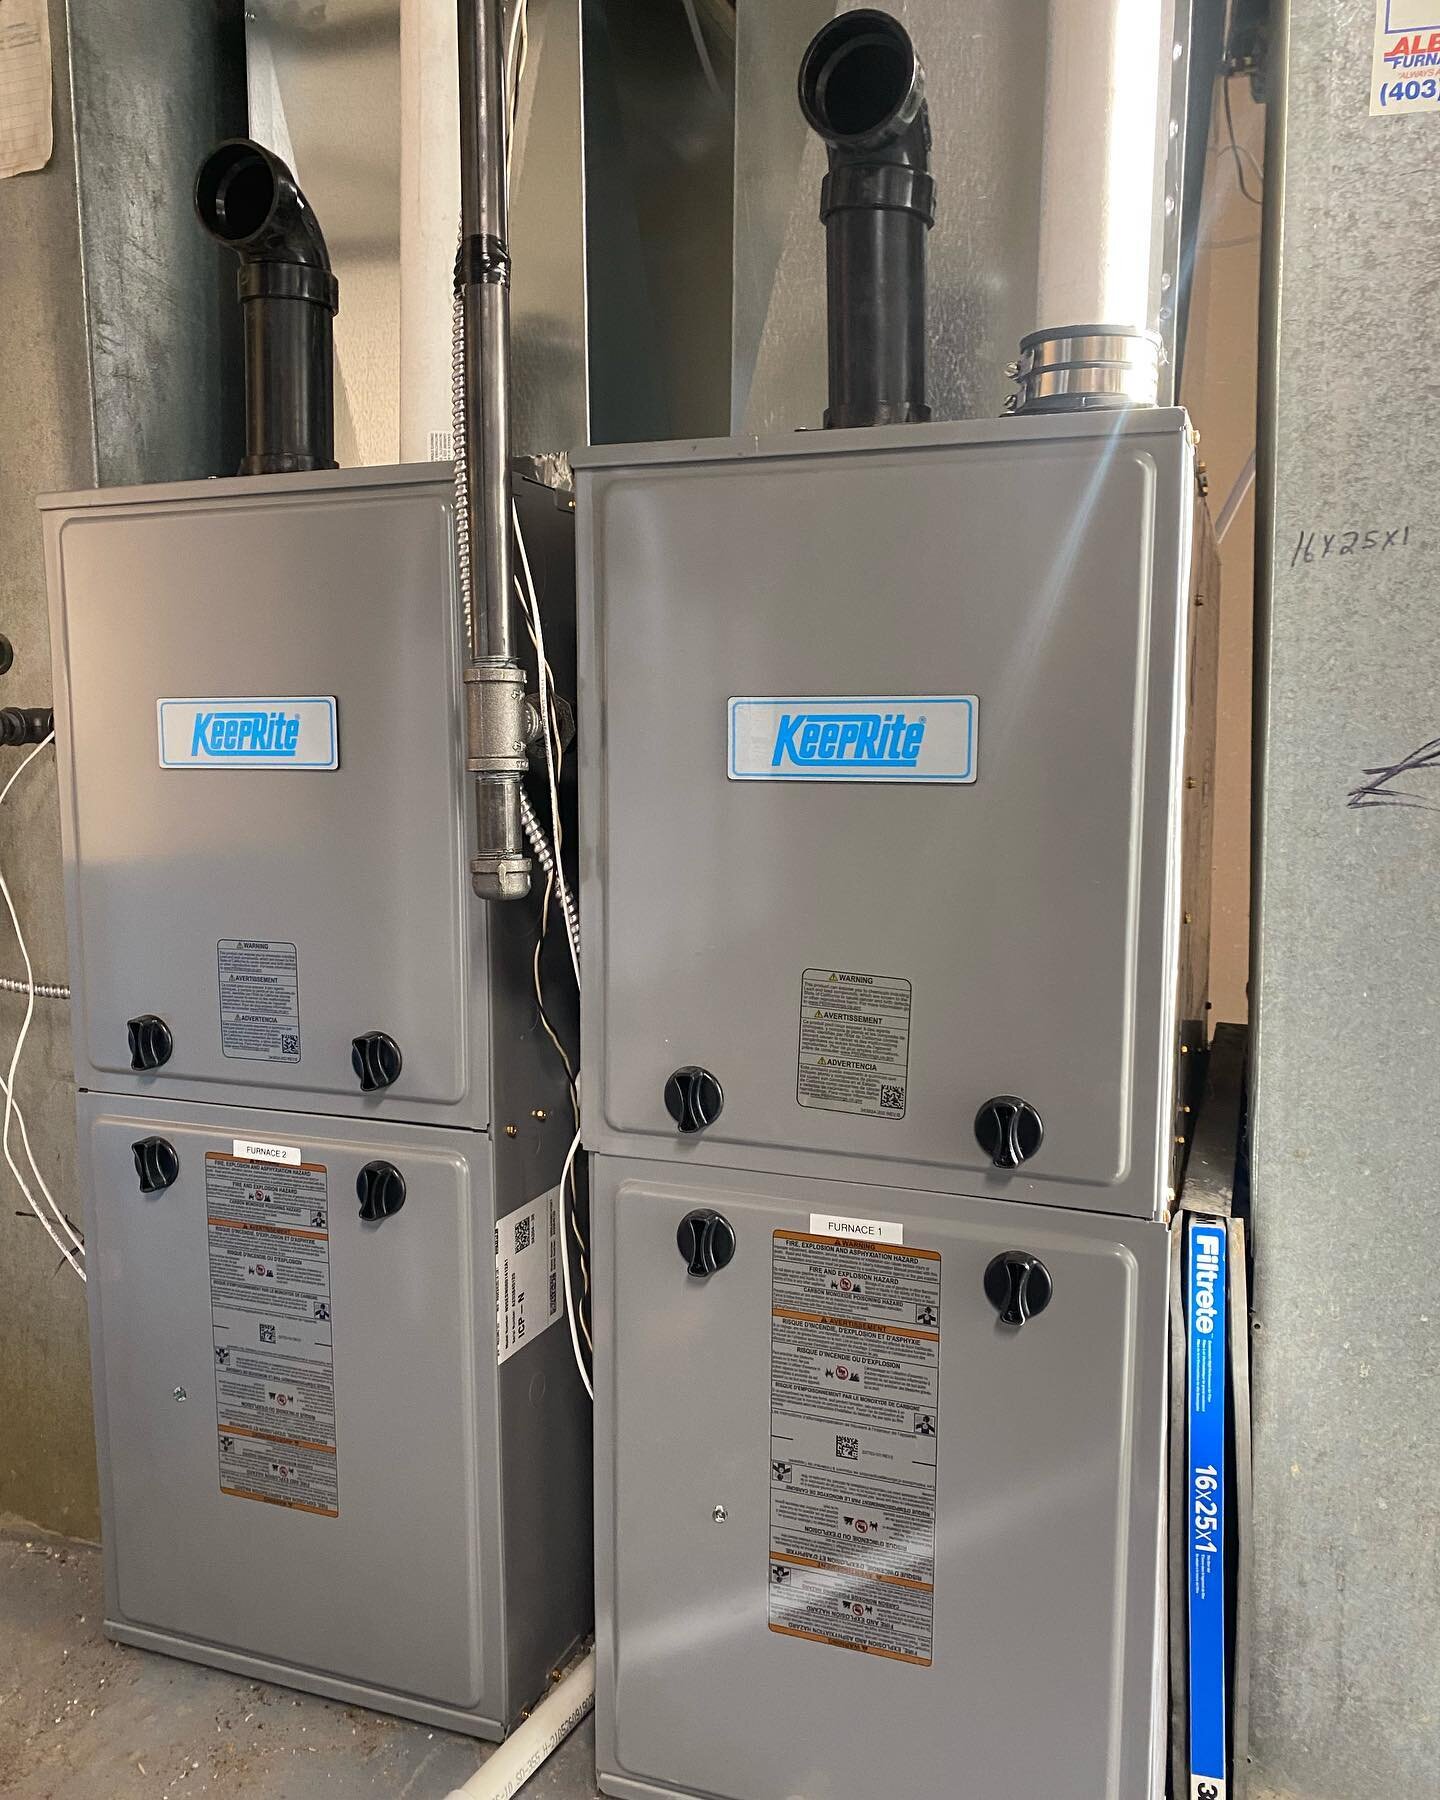 Ranch living! 🐎🐄🐓
&bull;
Installed 2 brand new high-efficiency furnaces for a great client!
&bull;
The old system was&hellip;.OLD and just wasn&rsquo;t working well anymore.
&bull;
As they say - &ldquo;Winter is coming&rdquo; - so, make sure your 